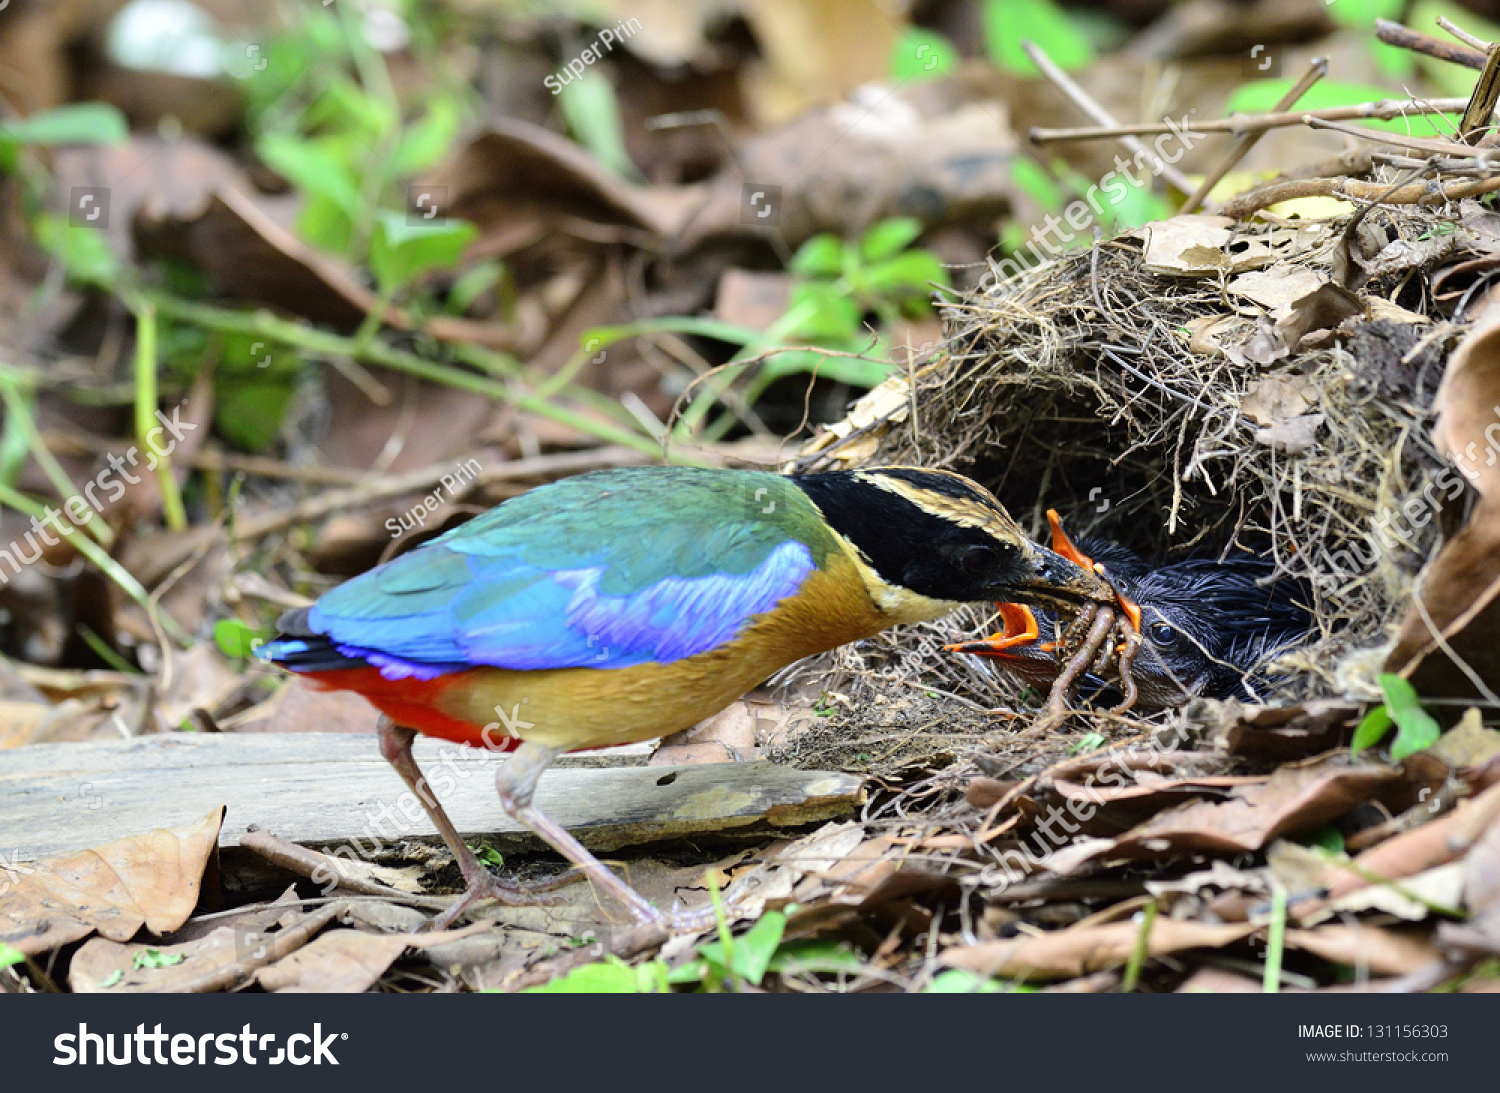 Blue-winged Pitta is feeding its chickens in the nest #131156303